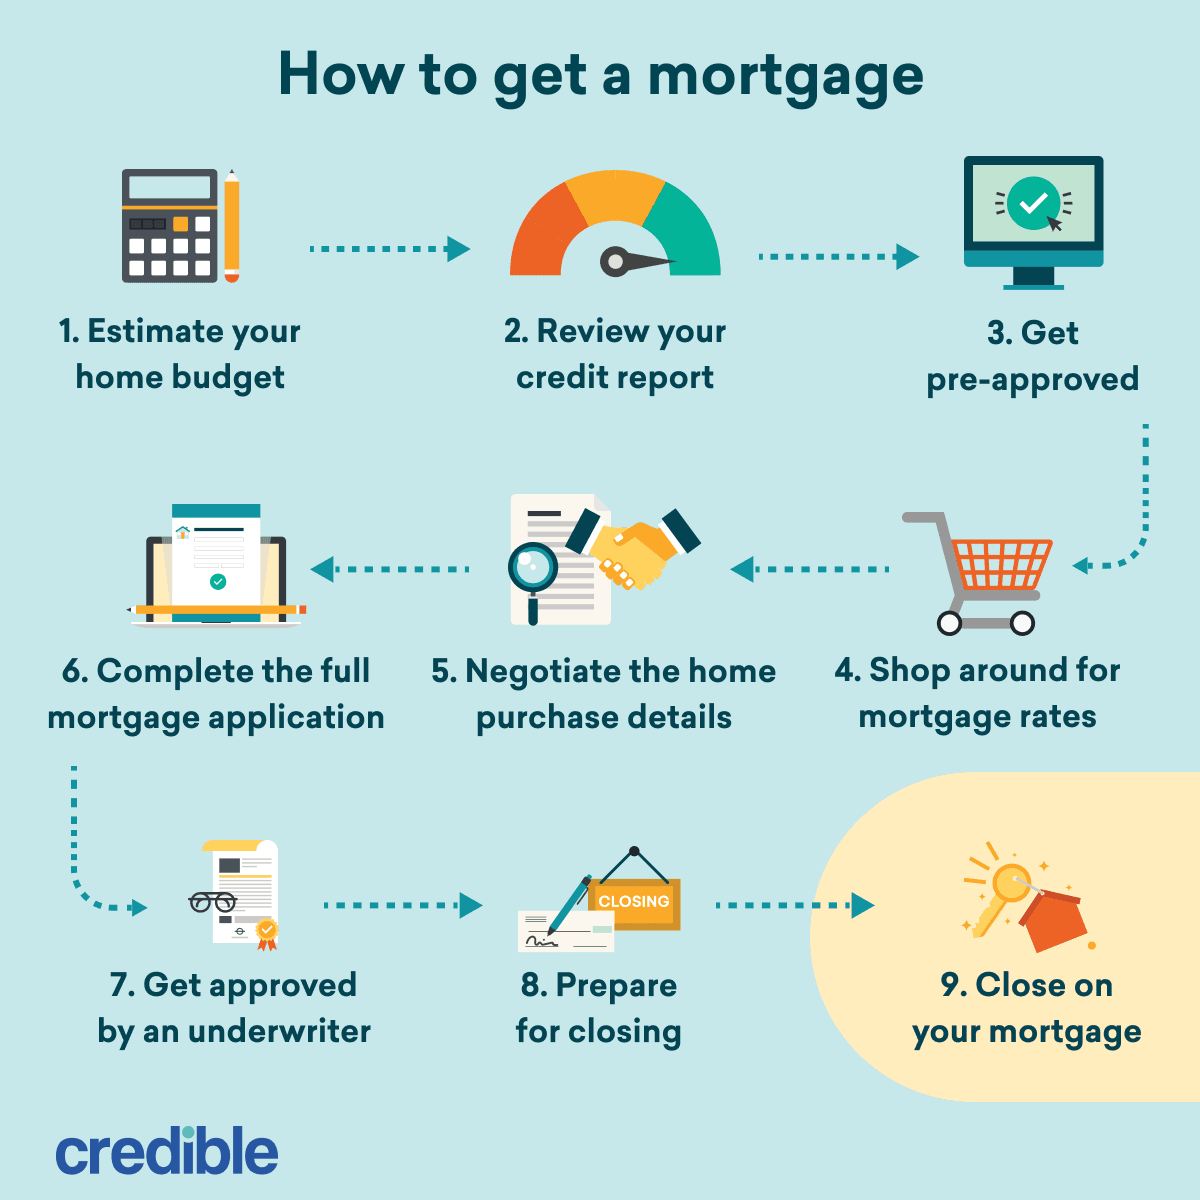 how-to-get-a-mortgage-flowchart-square.png